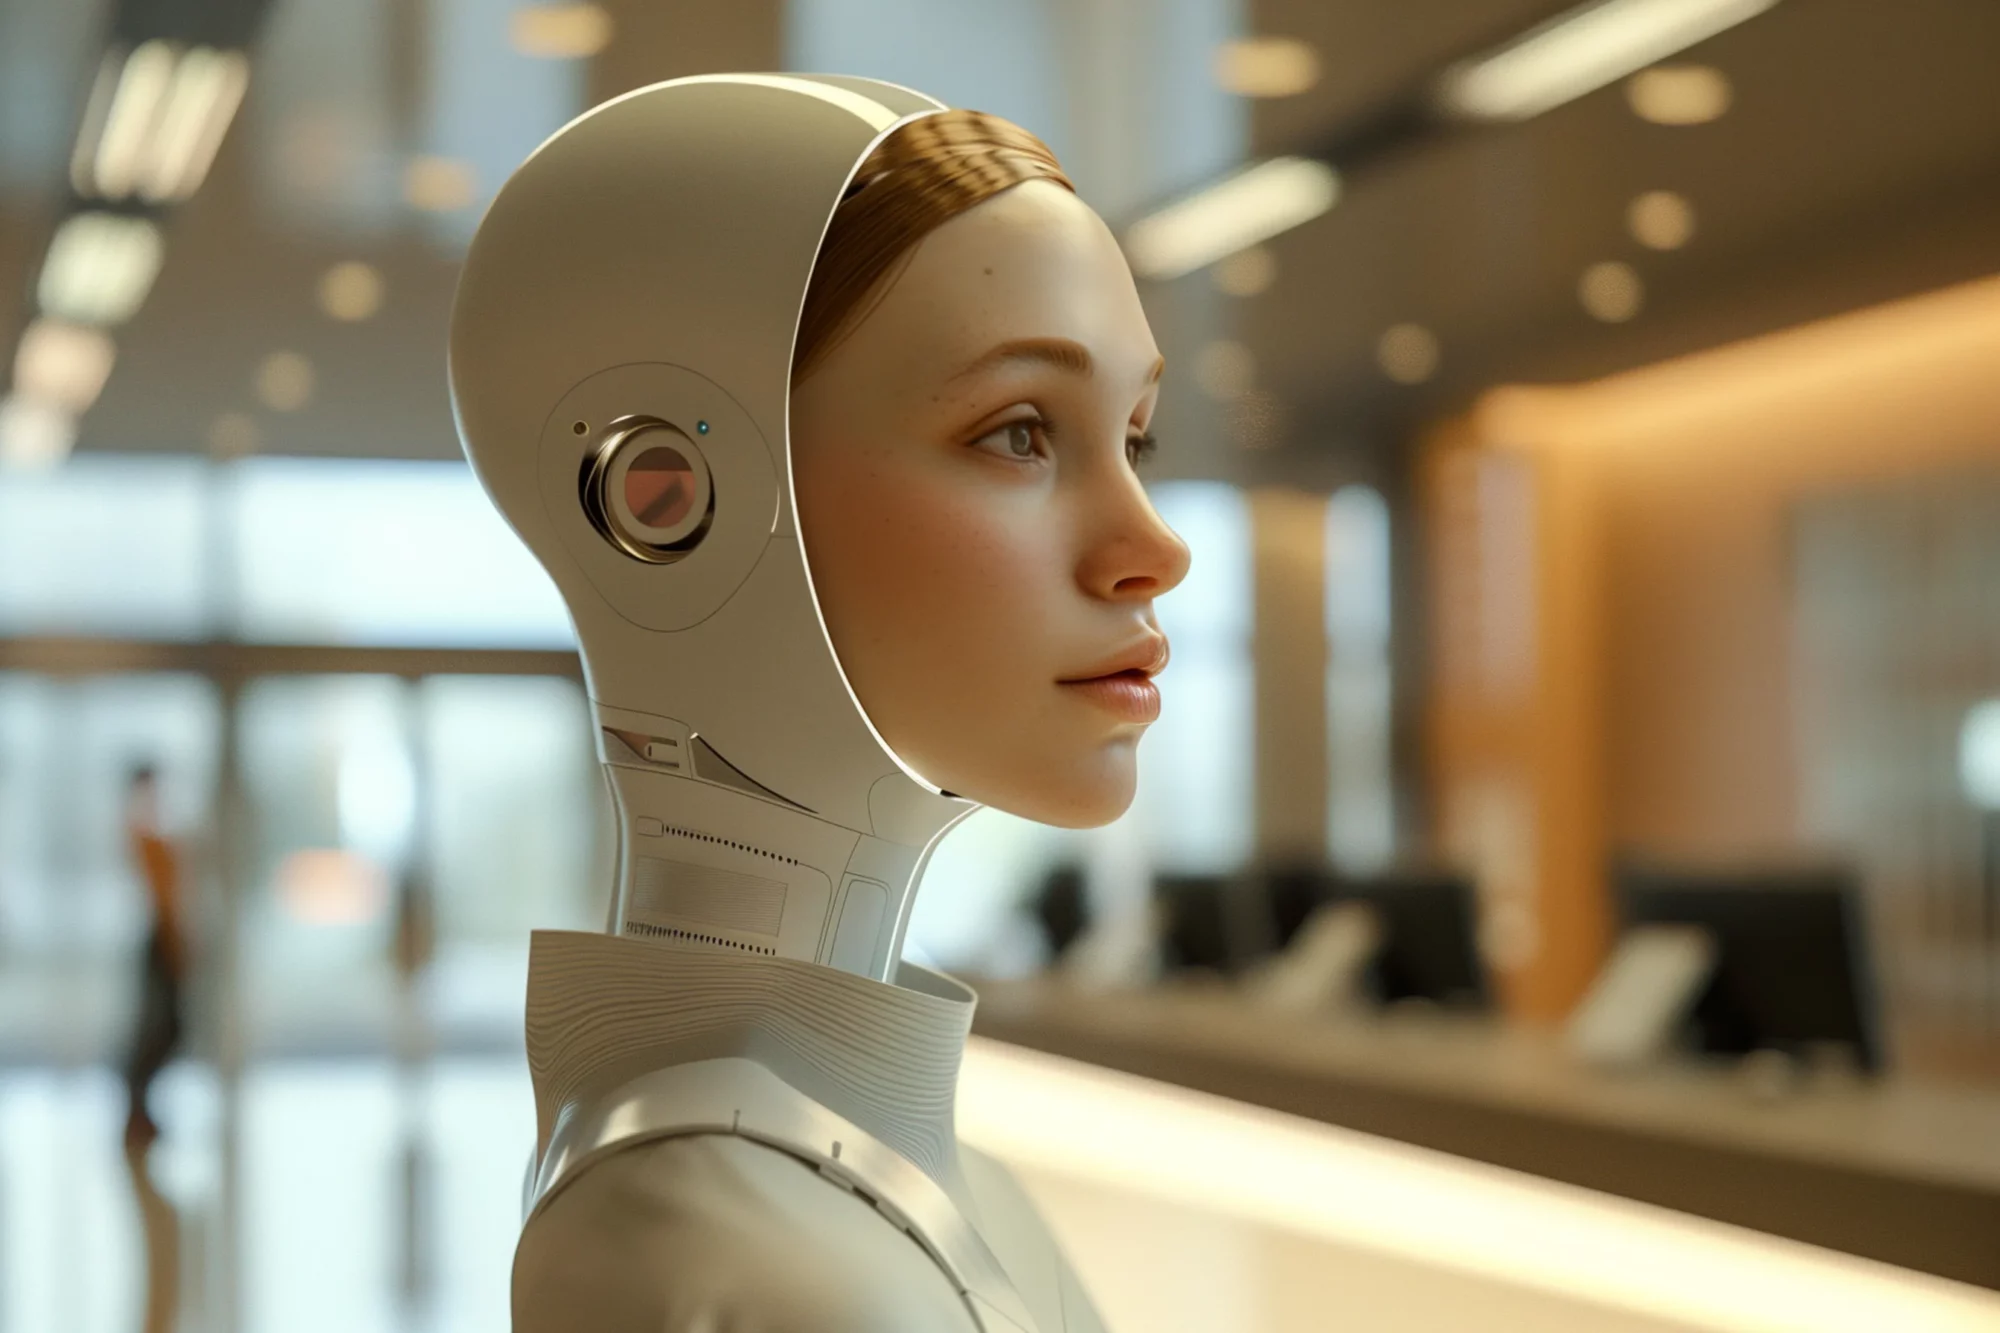 Une femme humanoïde robot © innovated4